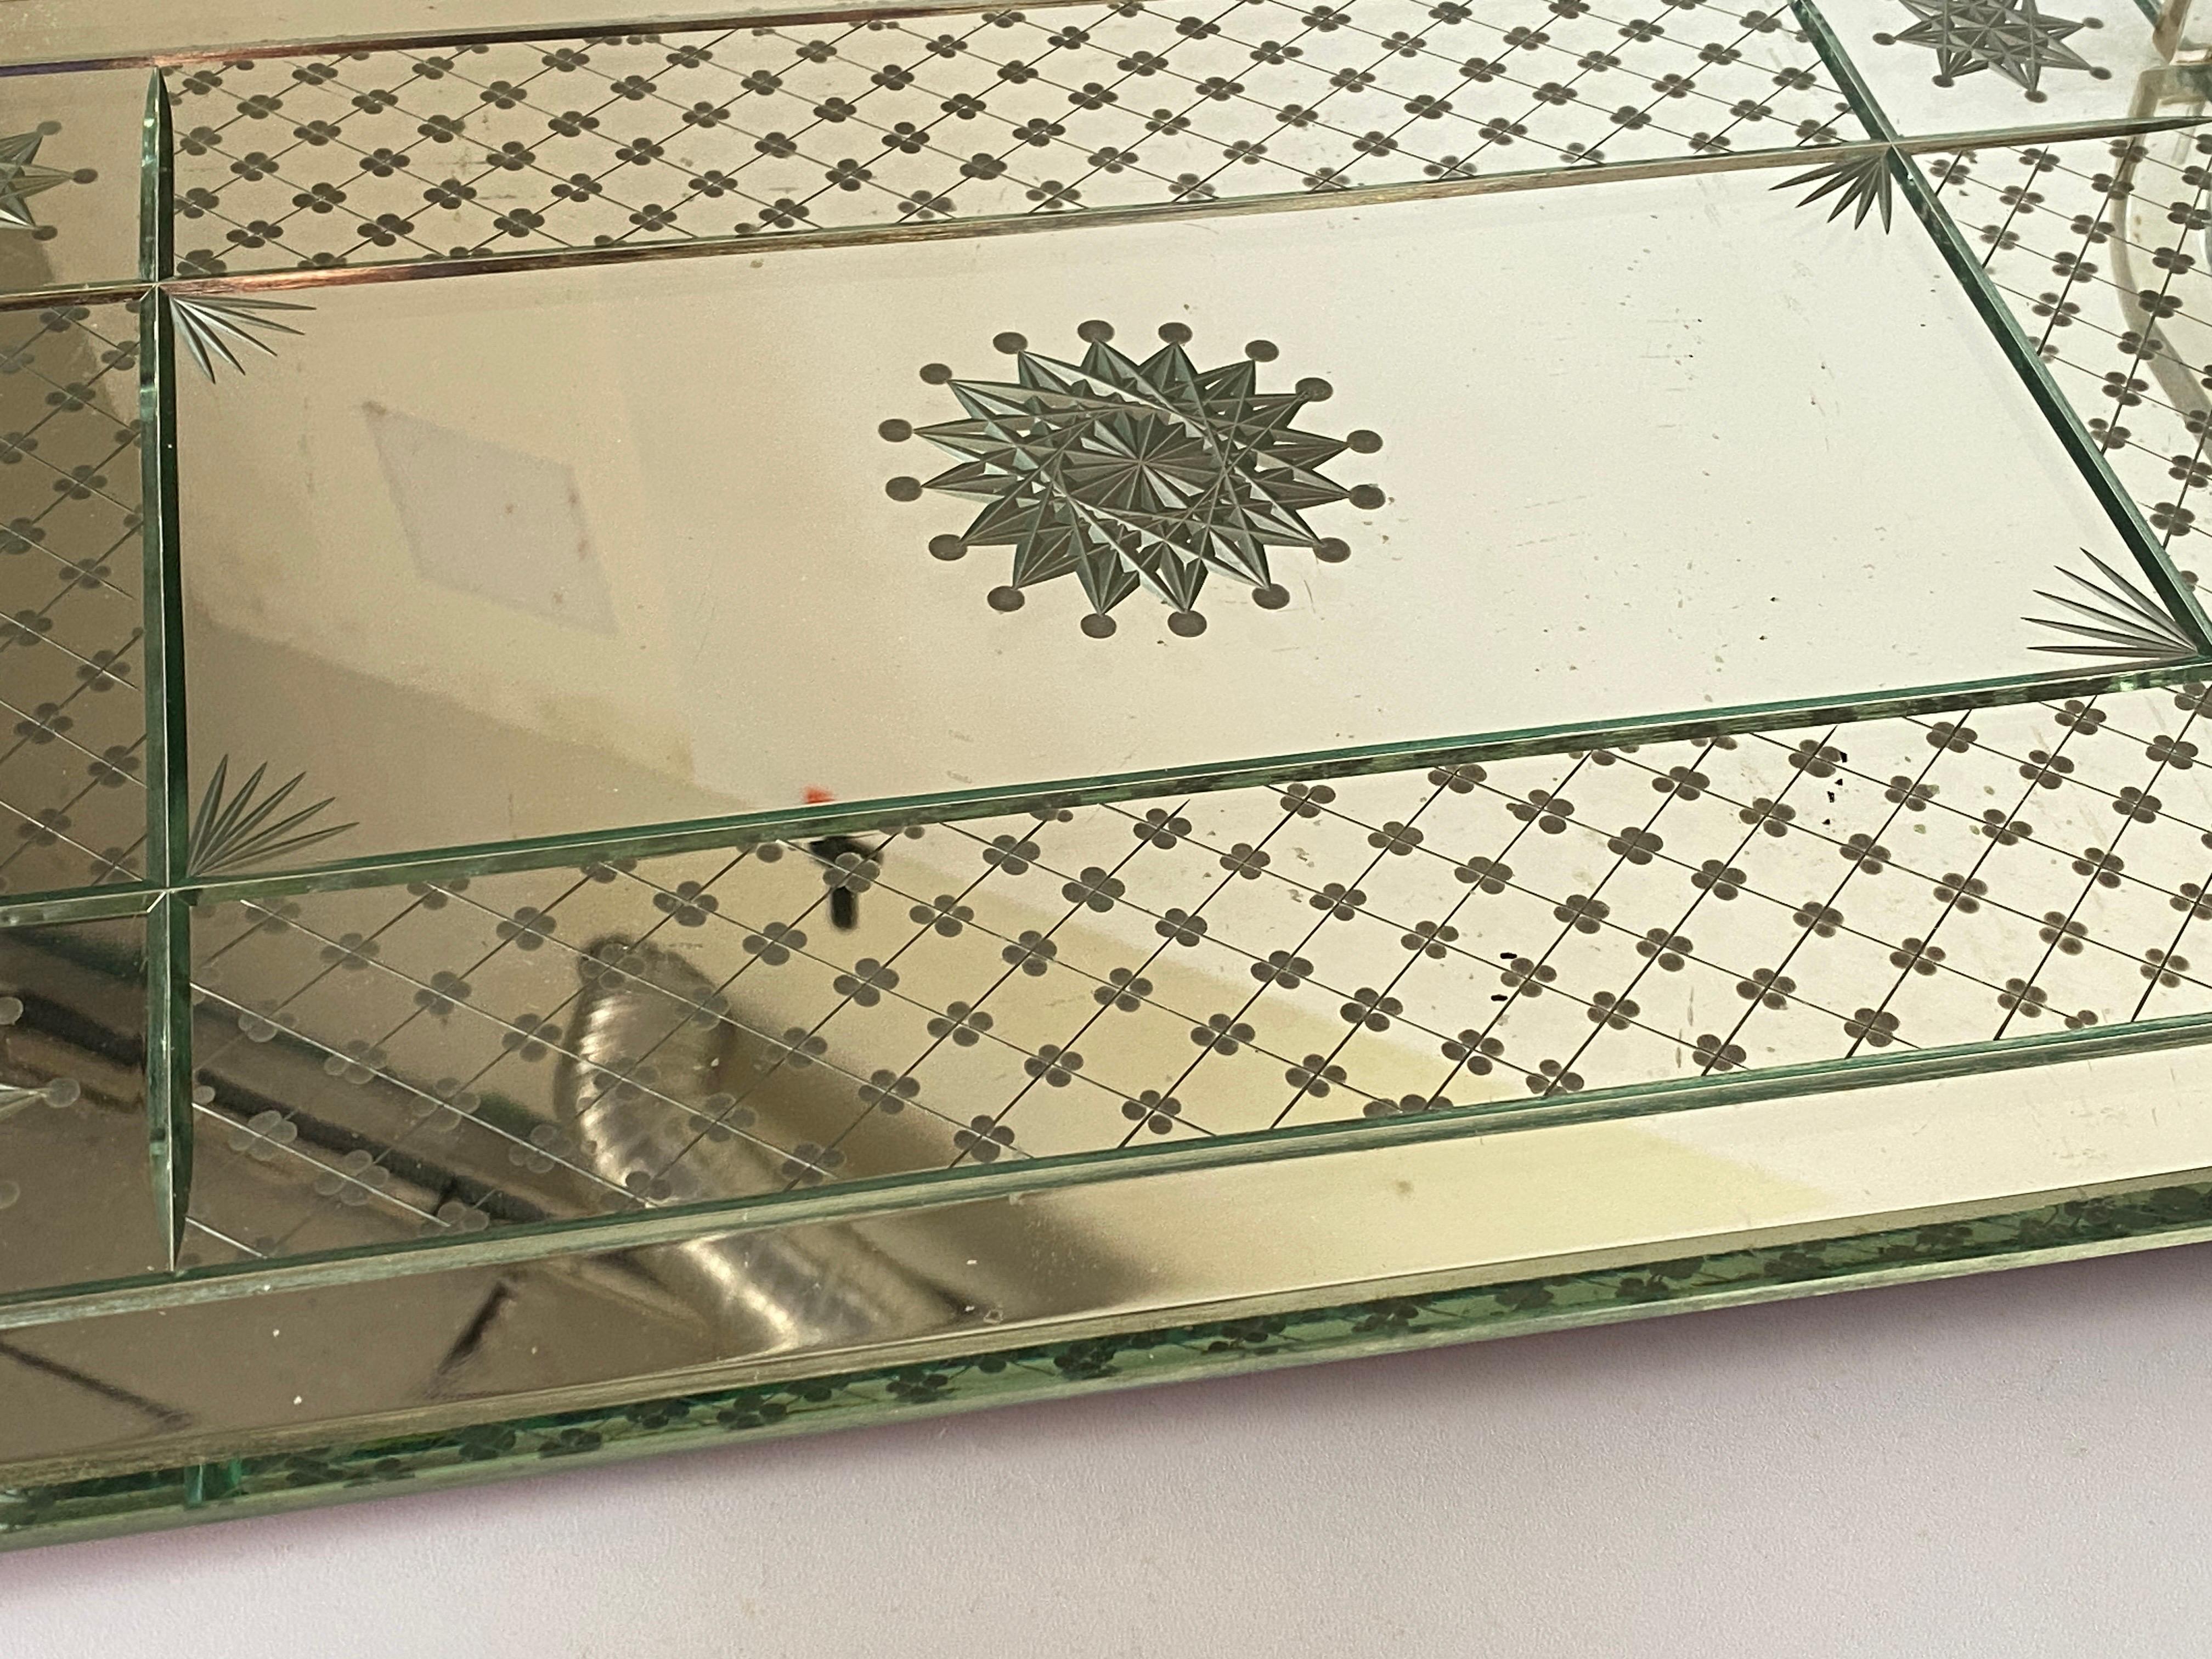 French Art Deco Tray, Beveled Mirror, Silver Color, Bakelite Handles, circa 1940 For Sale 6